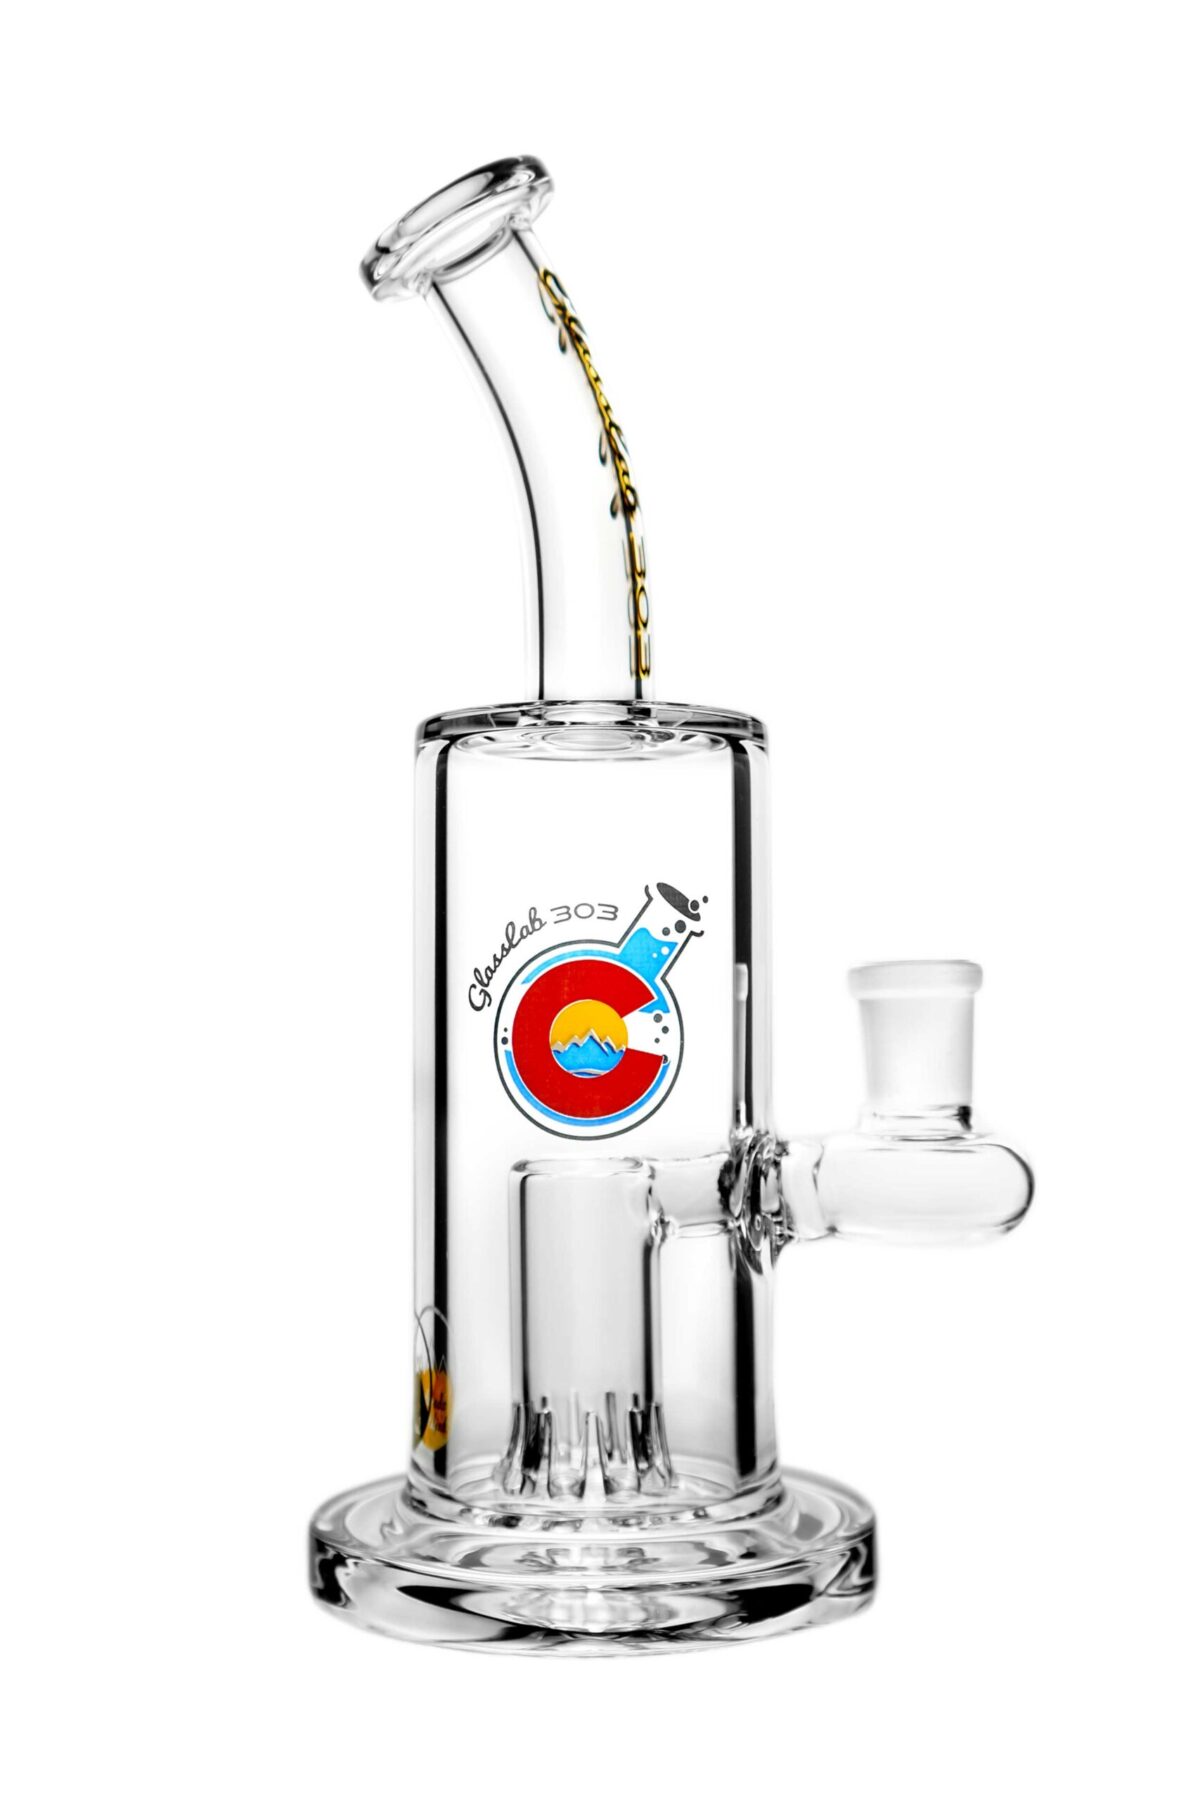 economy classic rig female banger hanger water pipe pipedup co